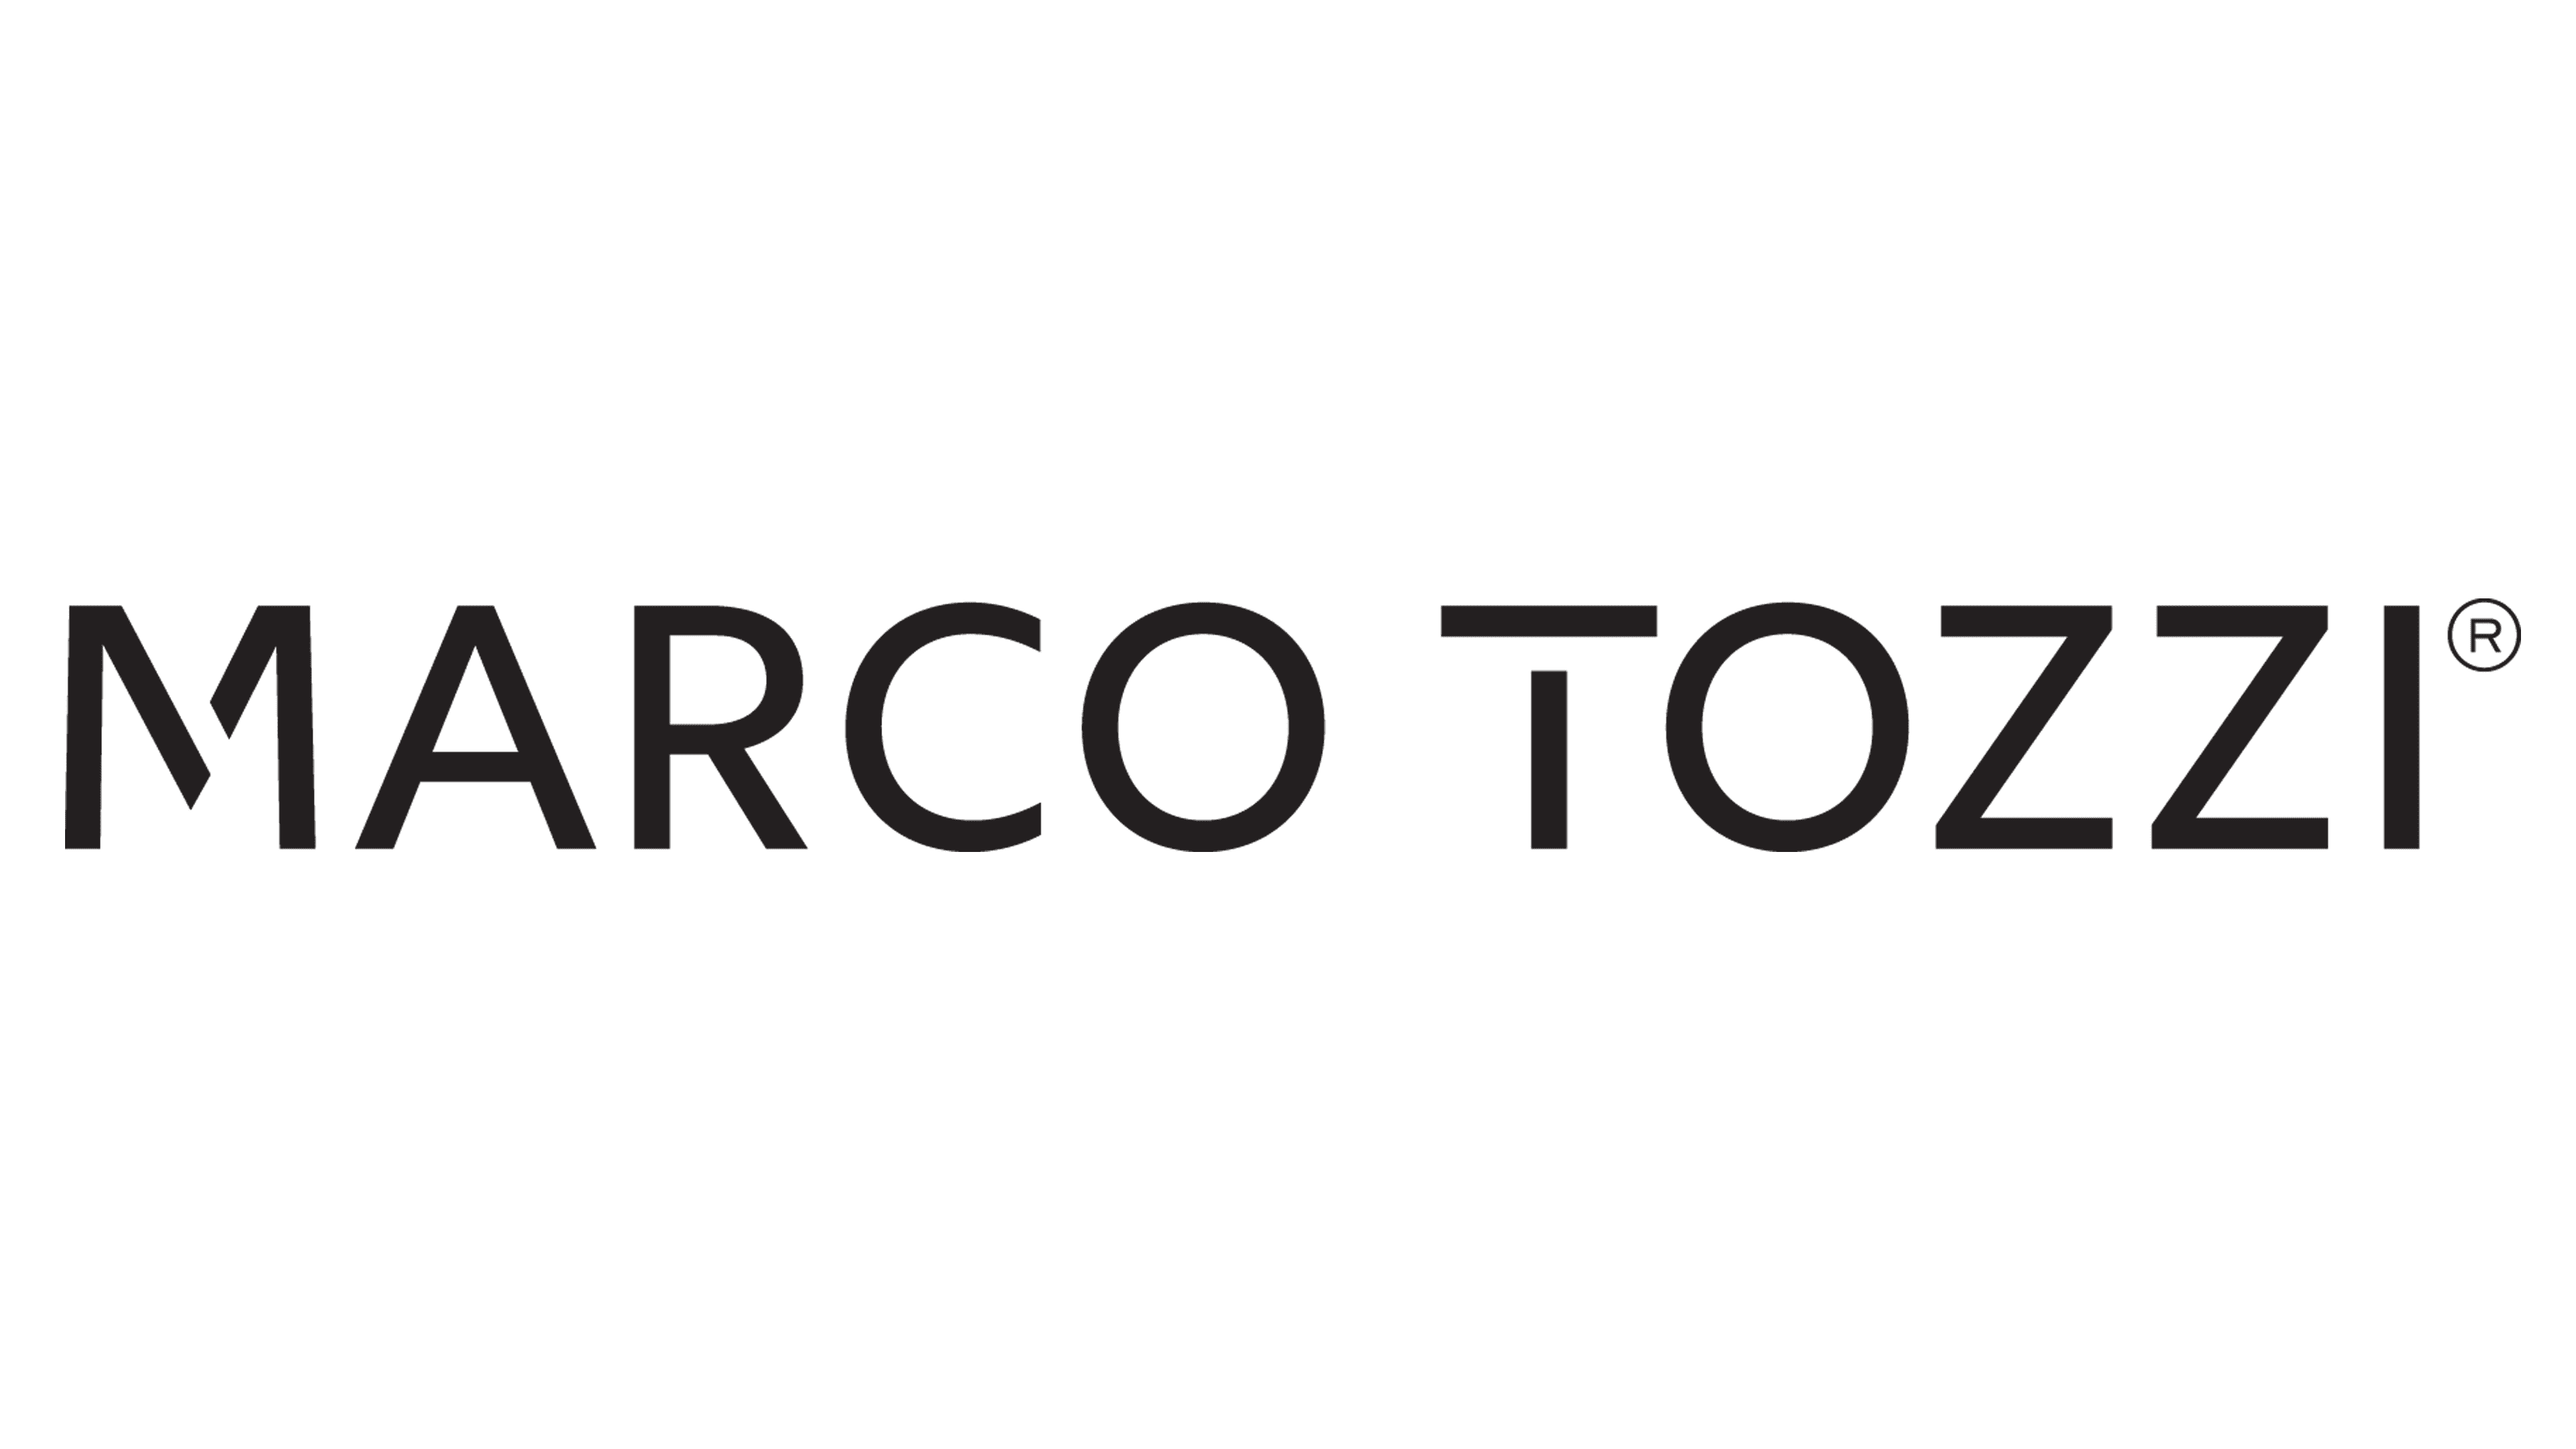 Marco Tozzi Logo and symbol, meaning, history, PNG, brand